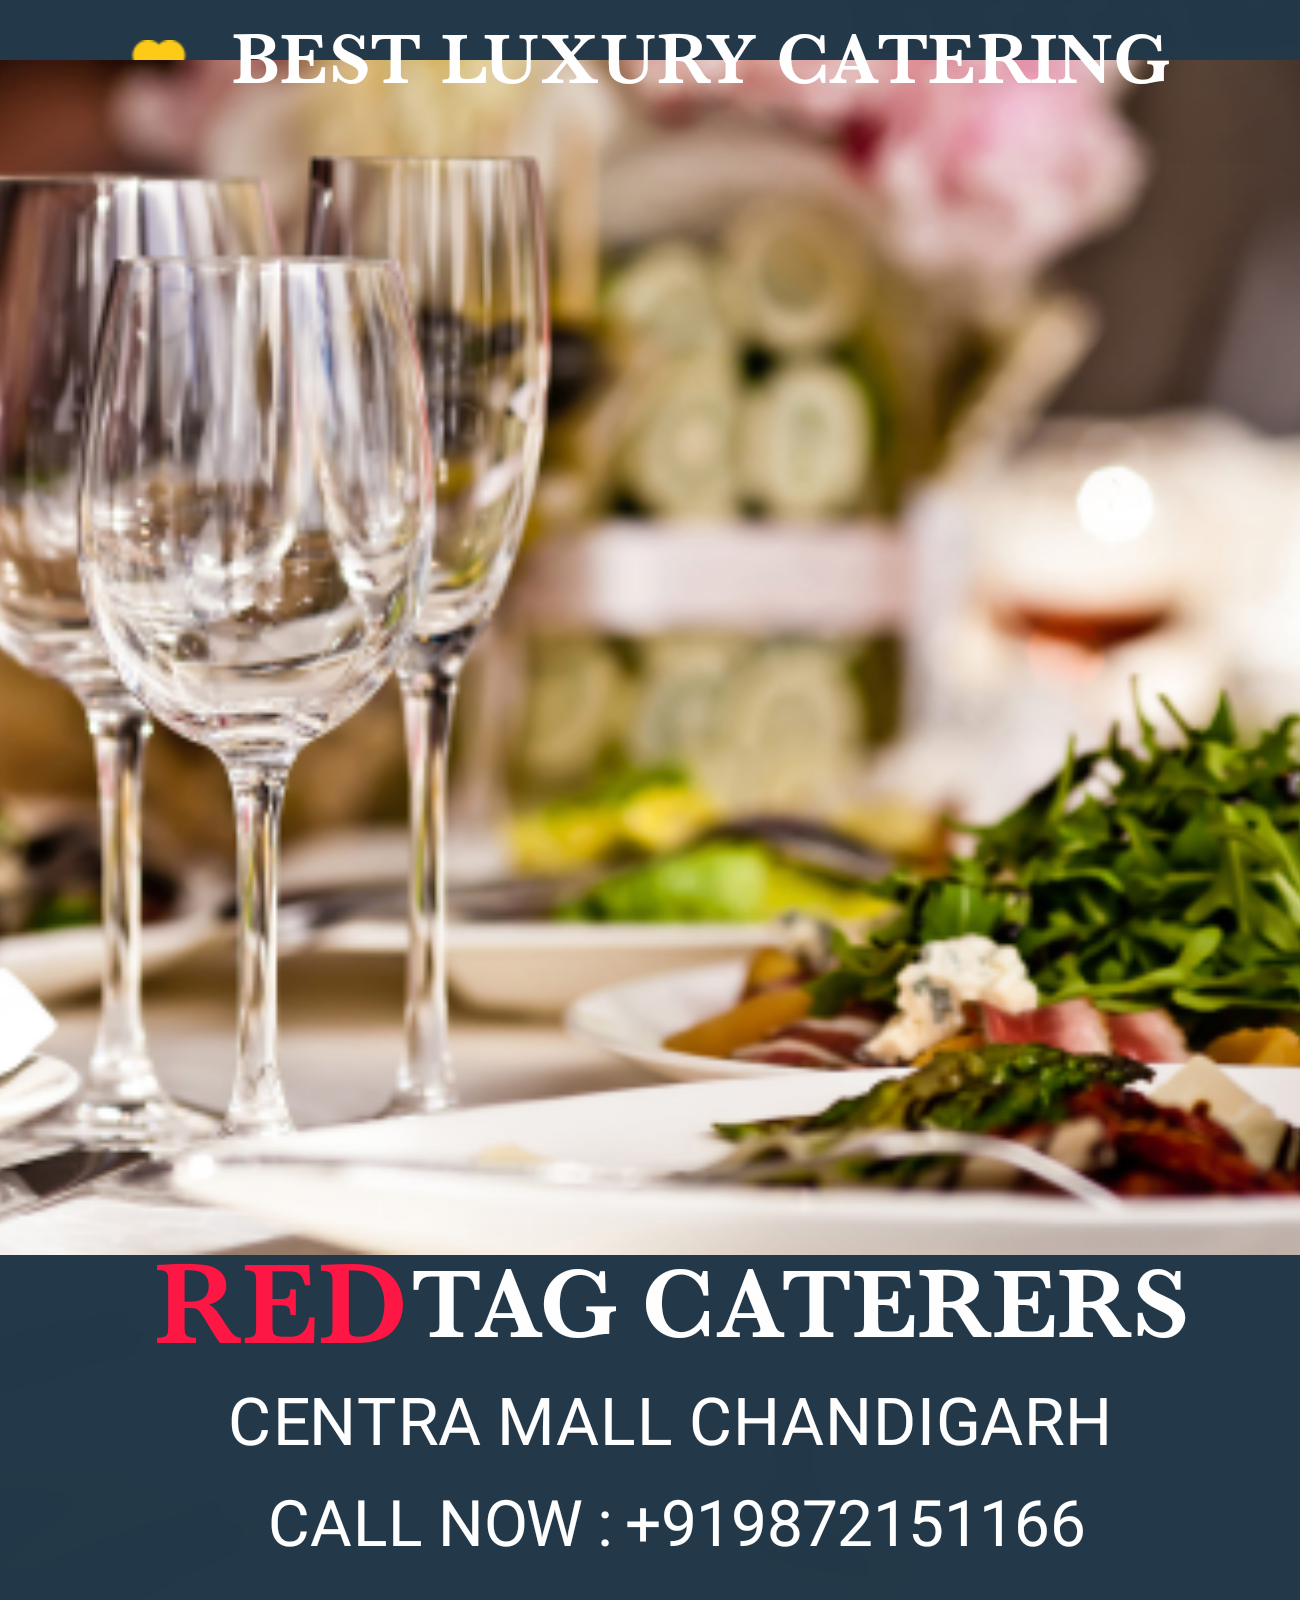 Best catering in zirakpur Chandigarh  | Red Tag Caterers | best innovative caterer in zirakpur Mohali, best professionals catering service in zirakpur Chandigarh, best catering service in zirkpur,  - GL46646